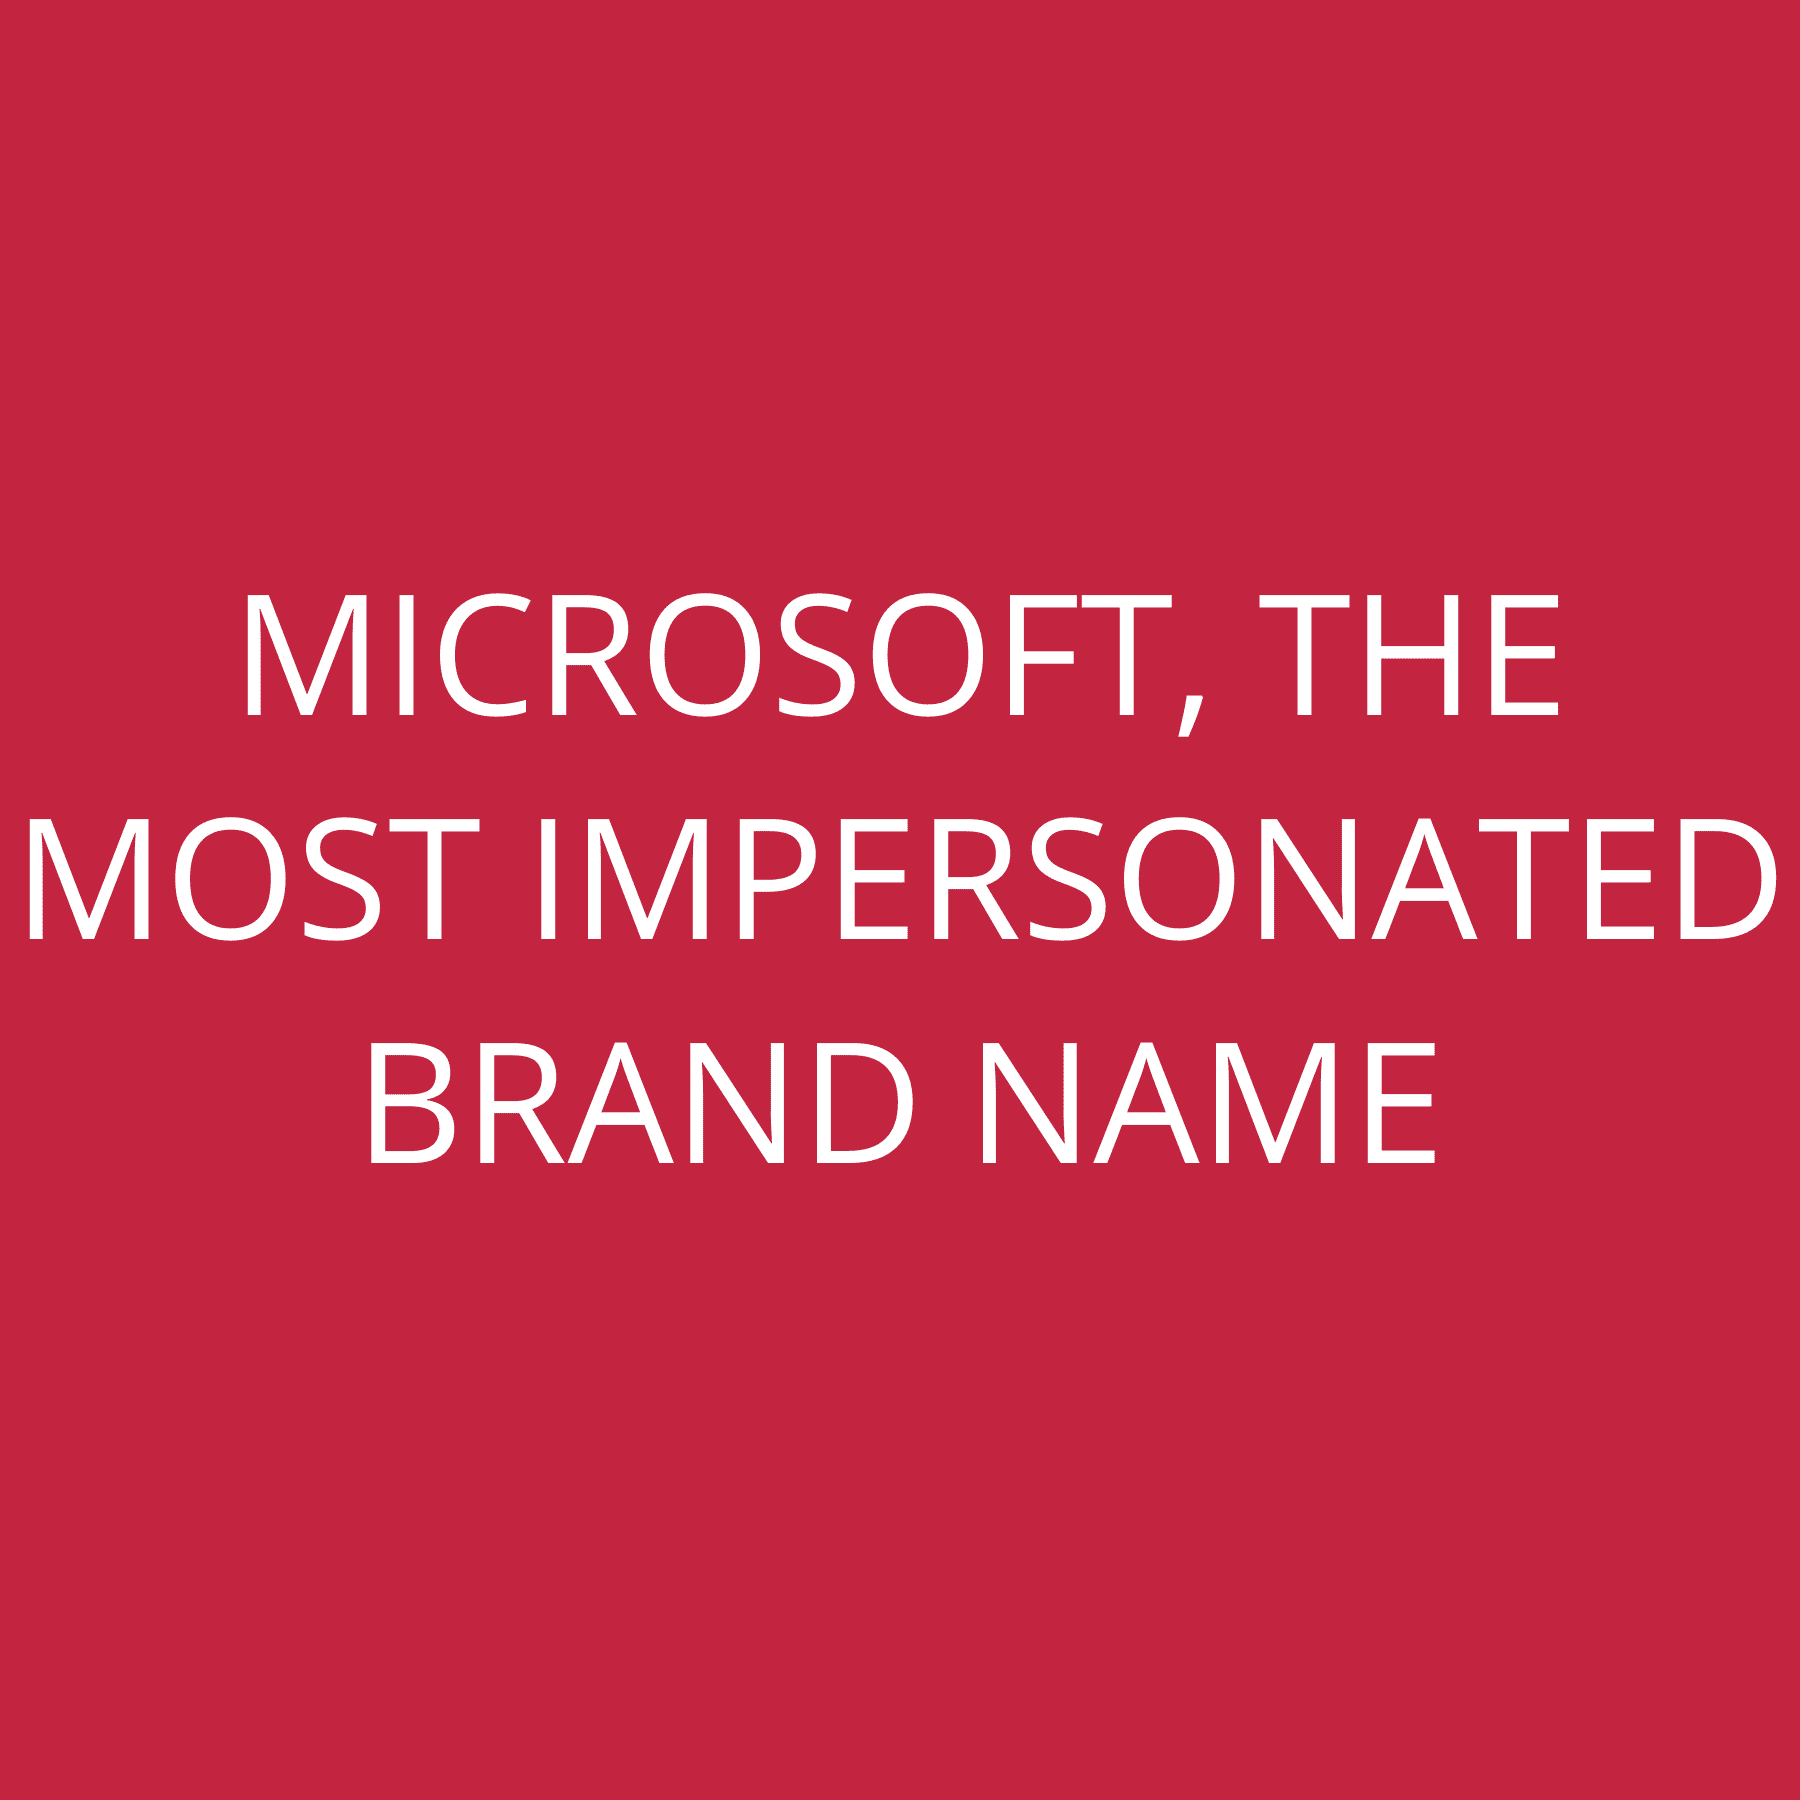 Microsoft, the most impersonated brand name